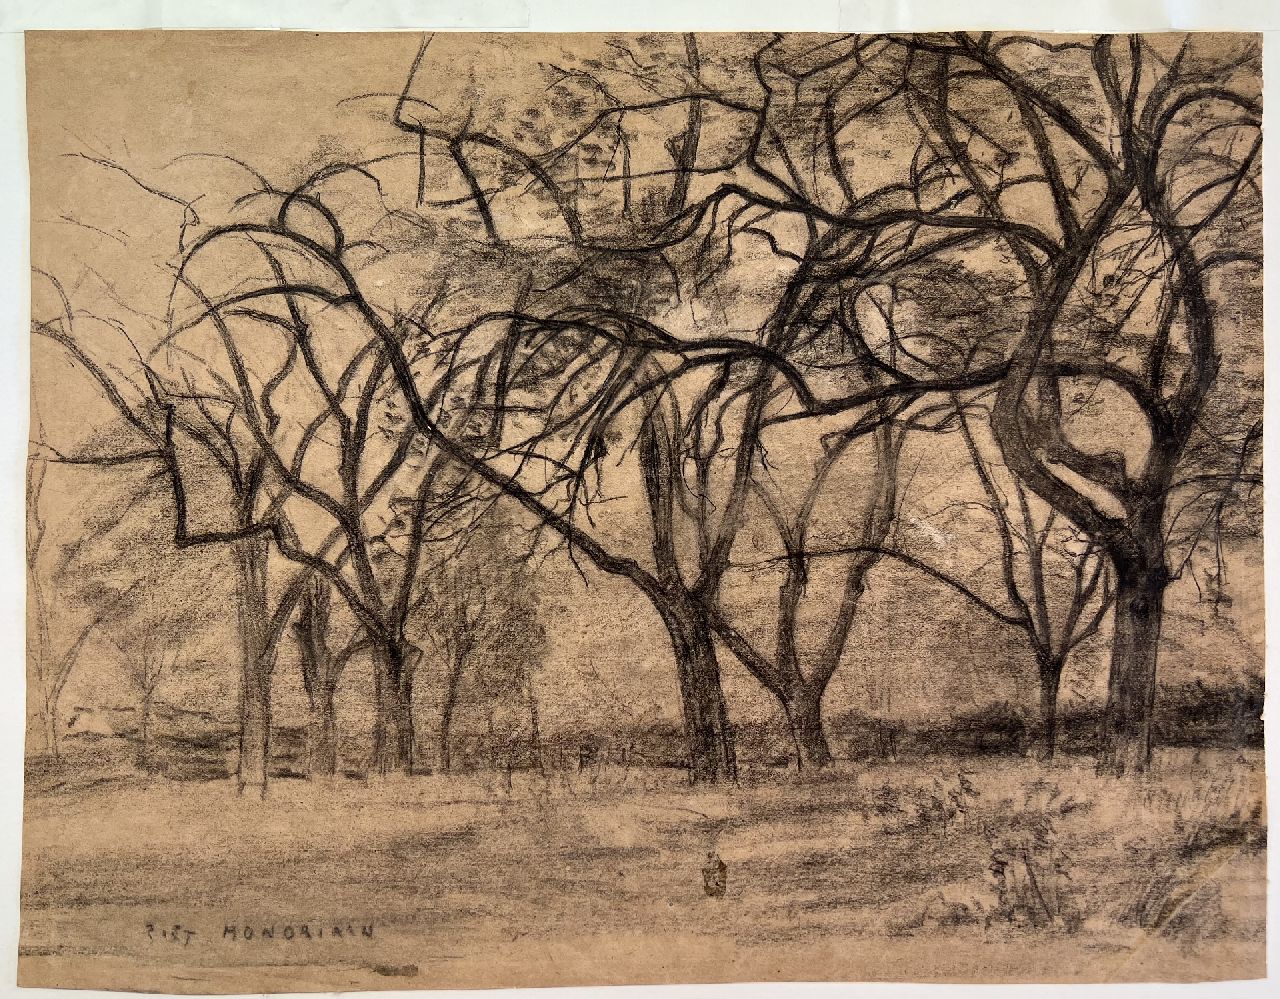 Mondriaan P.C.  | Pieter Cornelis 'Piet' Mondriaan | Watercolours and drawings offered for sale | Group of trees, black chalk on paper 33.4 x 44.0 cm, signed l.l. and 1902-1905